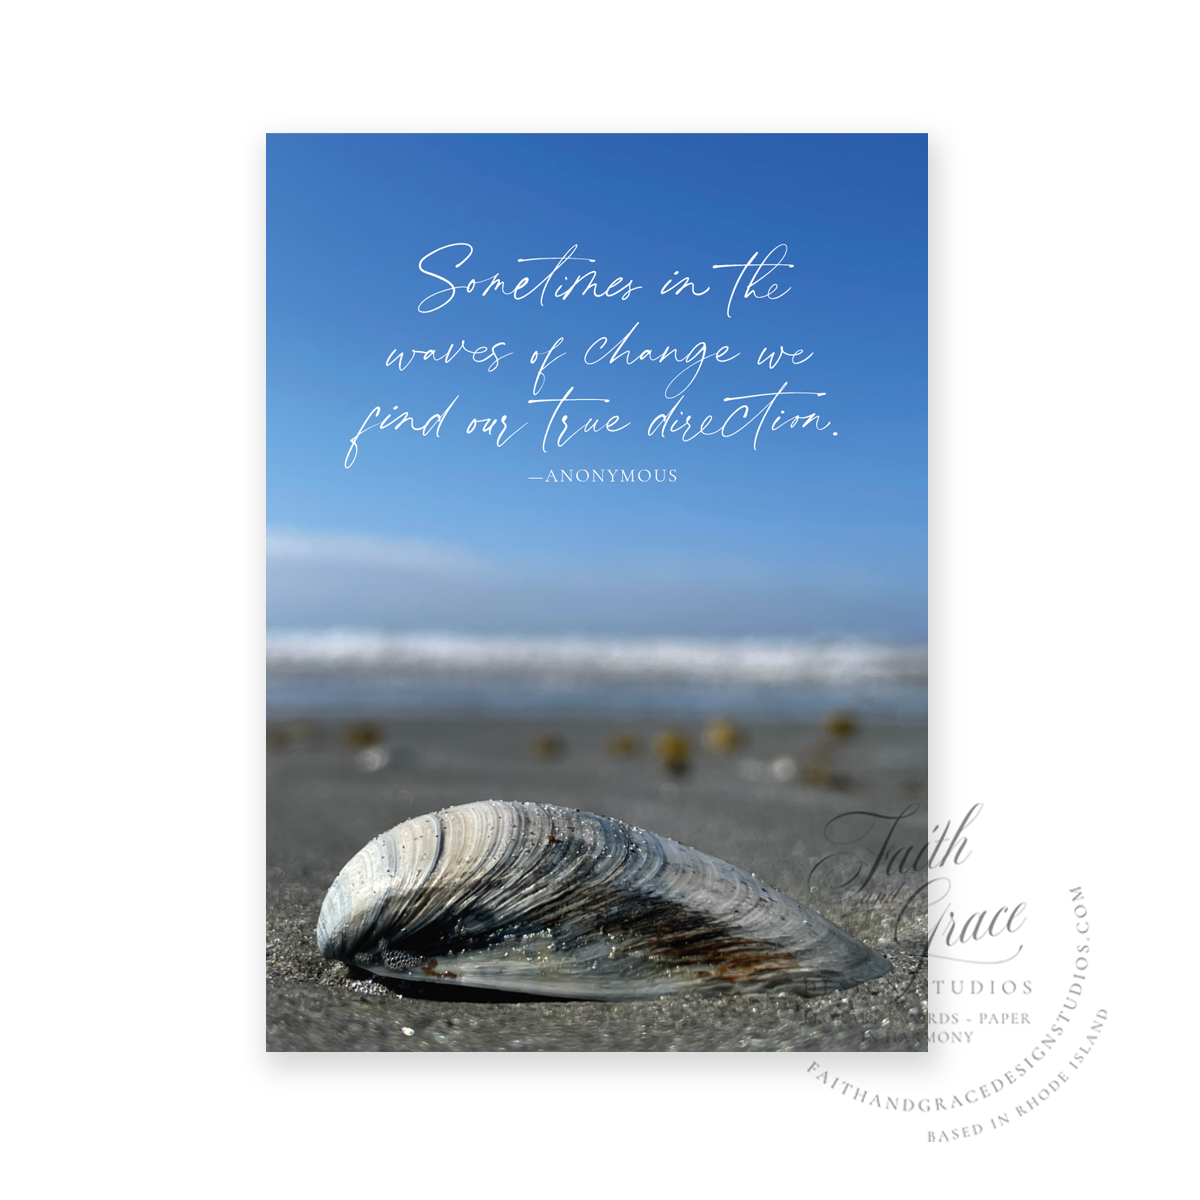 Photo of shell on Easton's Beach in Newport set against blue sky Greeting Card